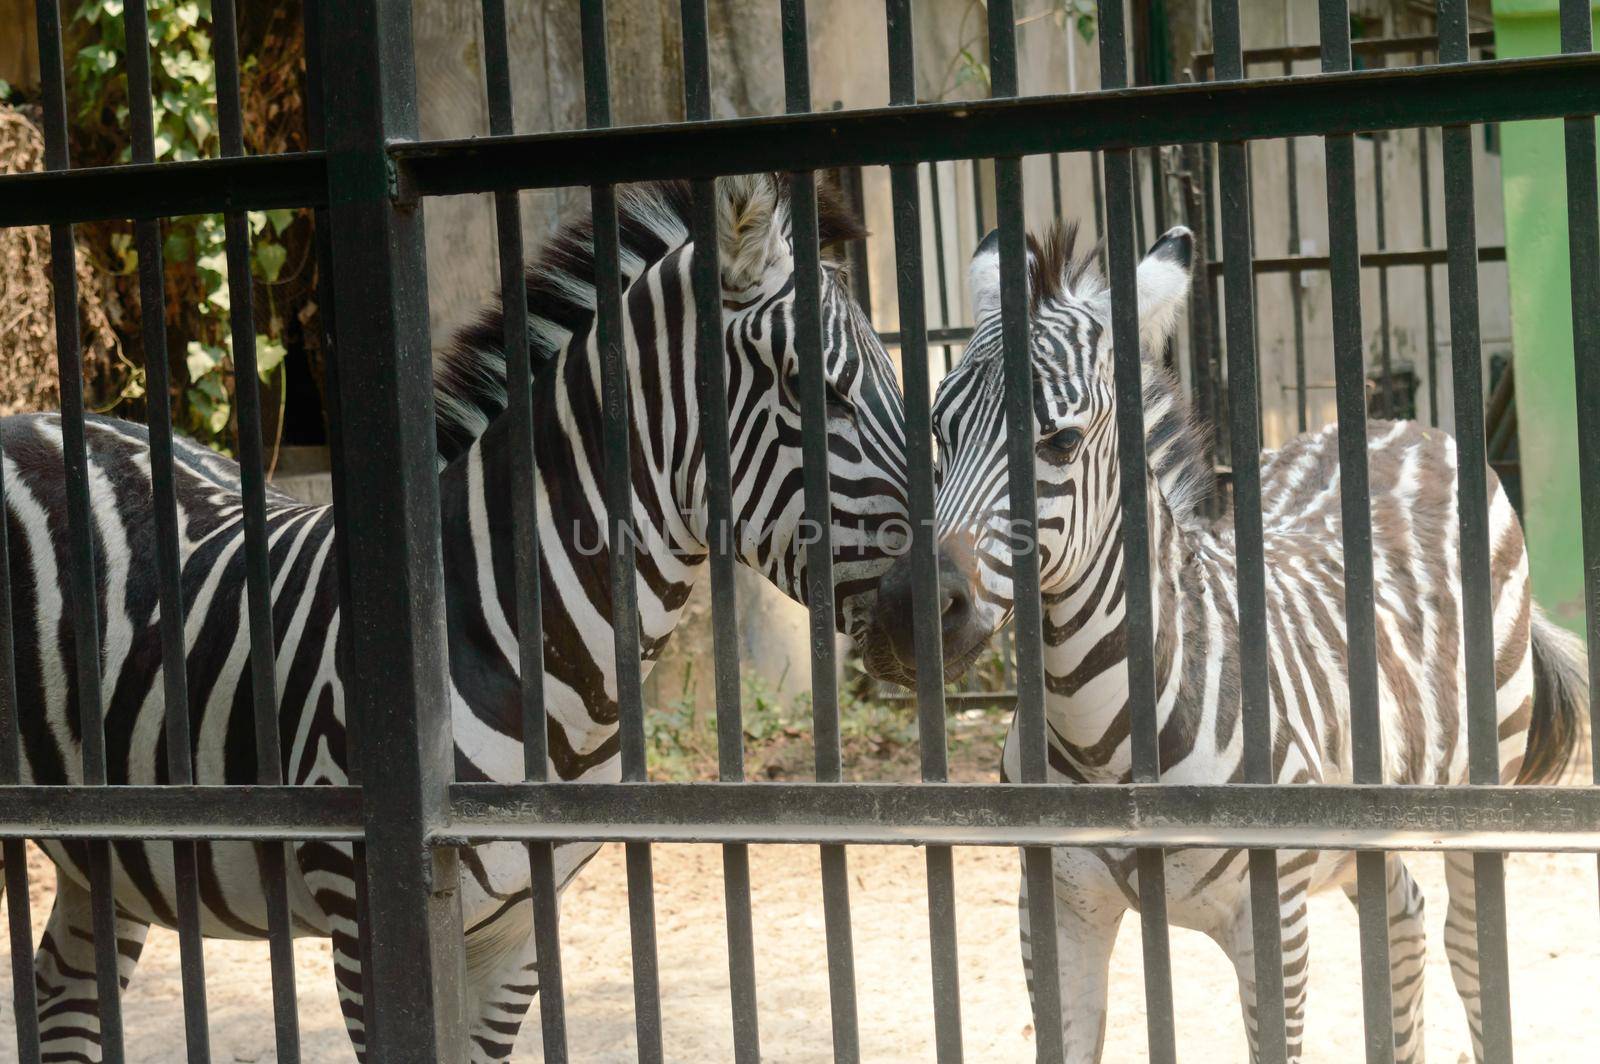 Animals in captivity. White stripes zebra inside the cage in Alipur Zoological Garden, Kolkata, West Bengal, India South Asia.